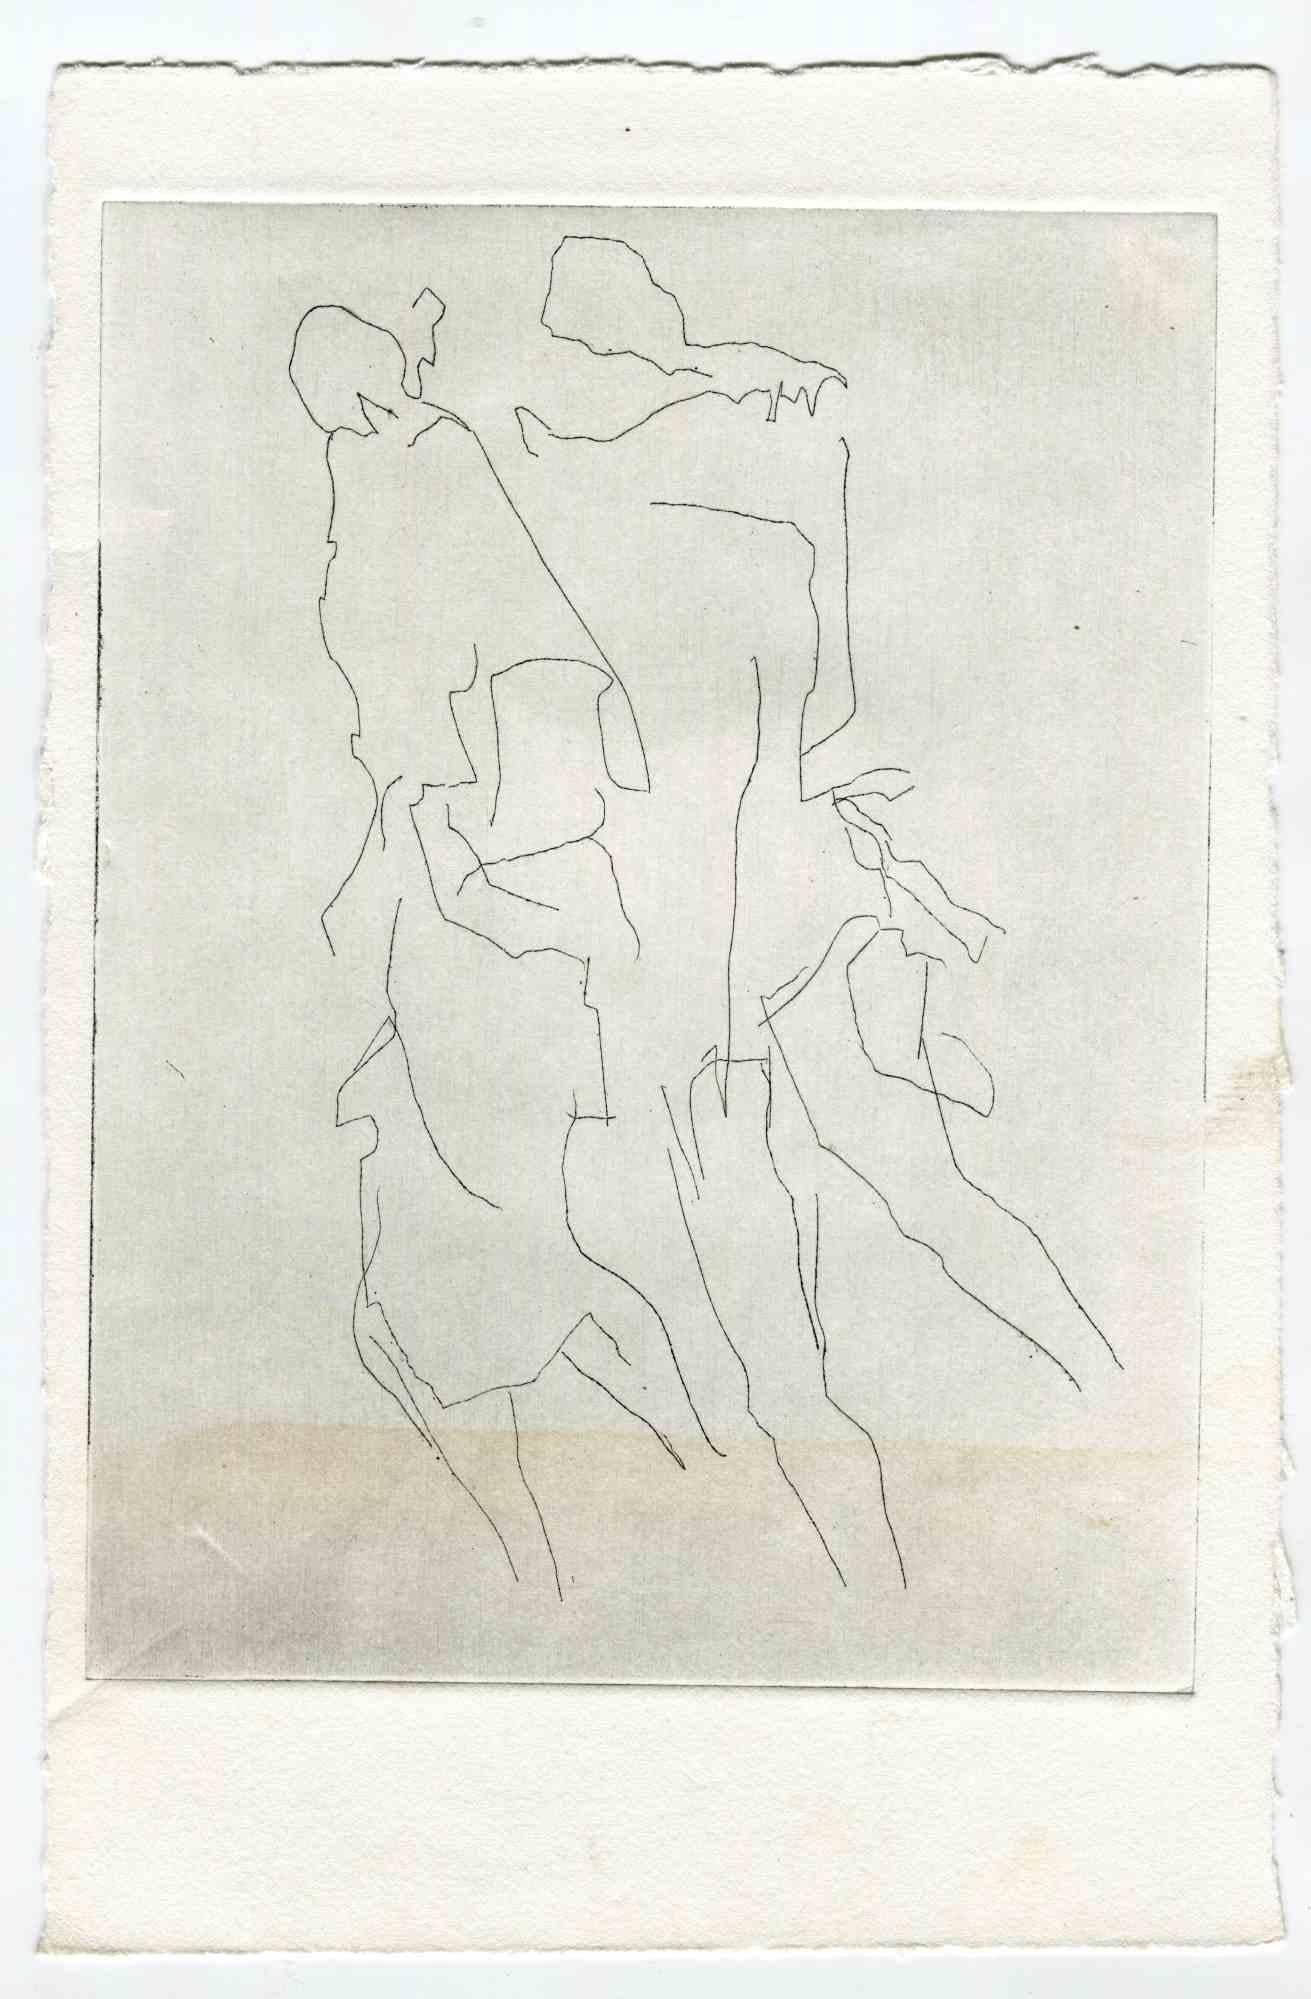 Unknown Figurative Print - Figures - Original Etching and Drypoint - Mid-20th Century